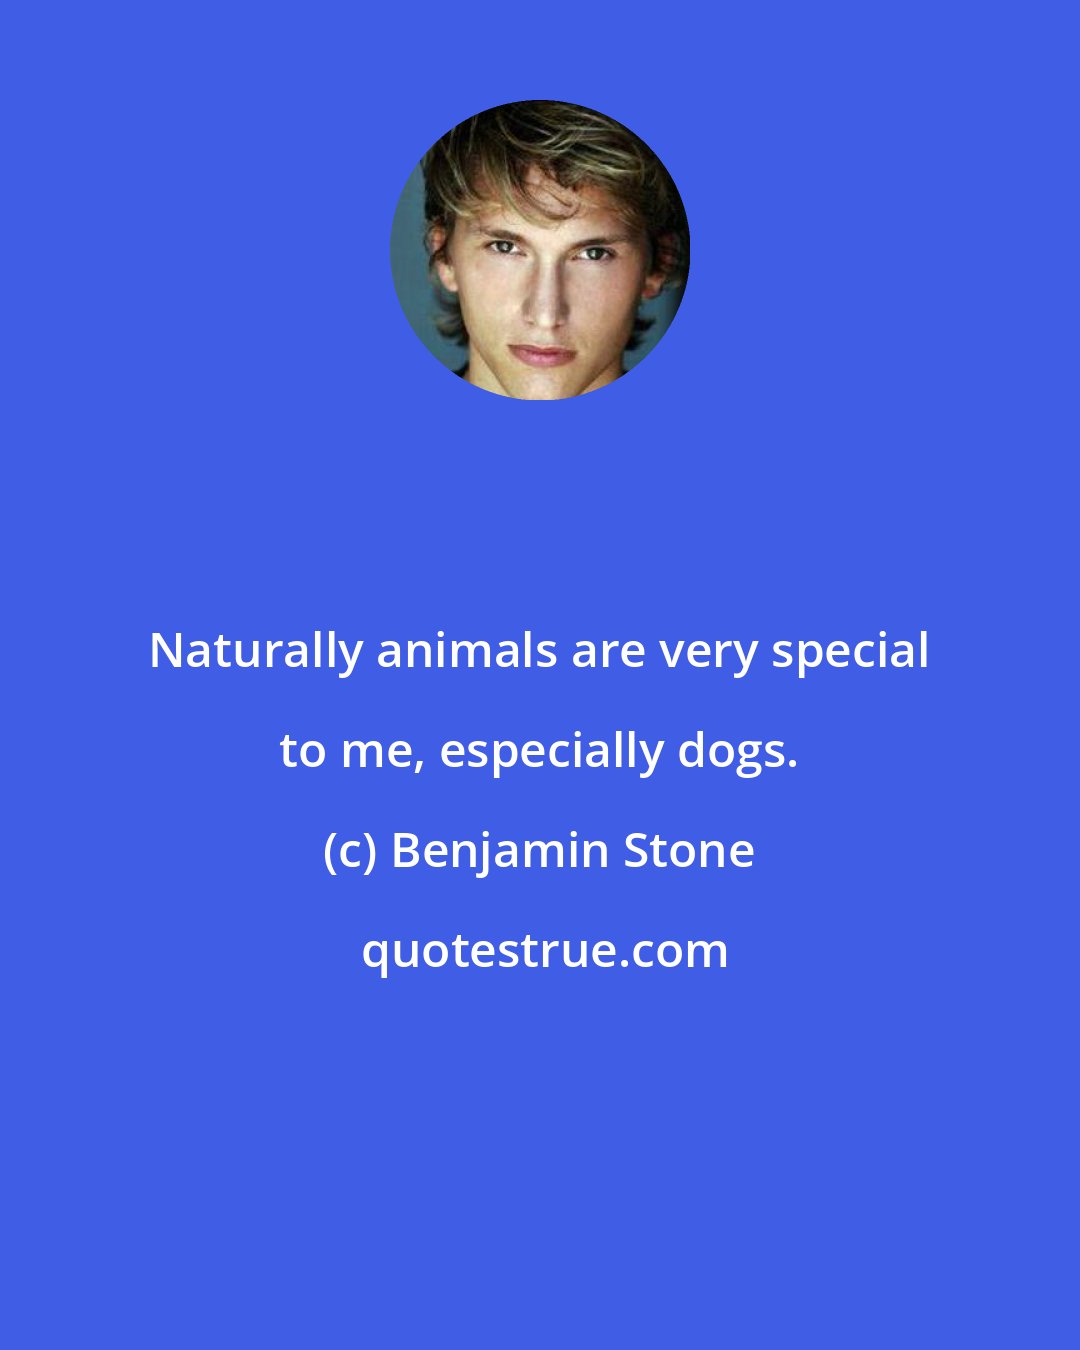 Benjamin Stone: Naturally animals are very special to me, especially dogs.